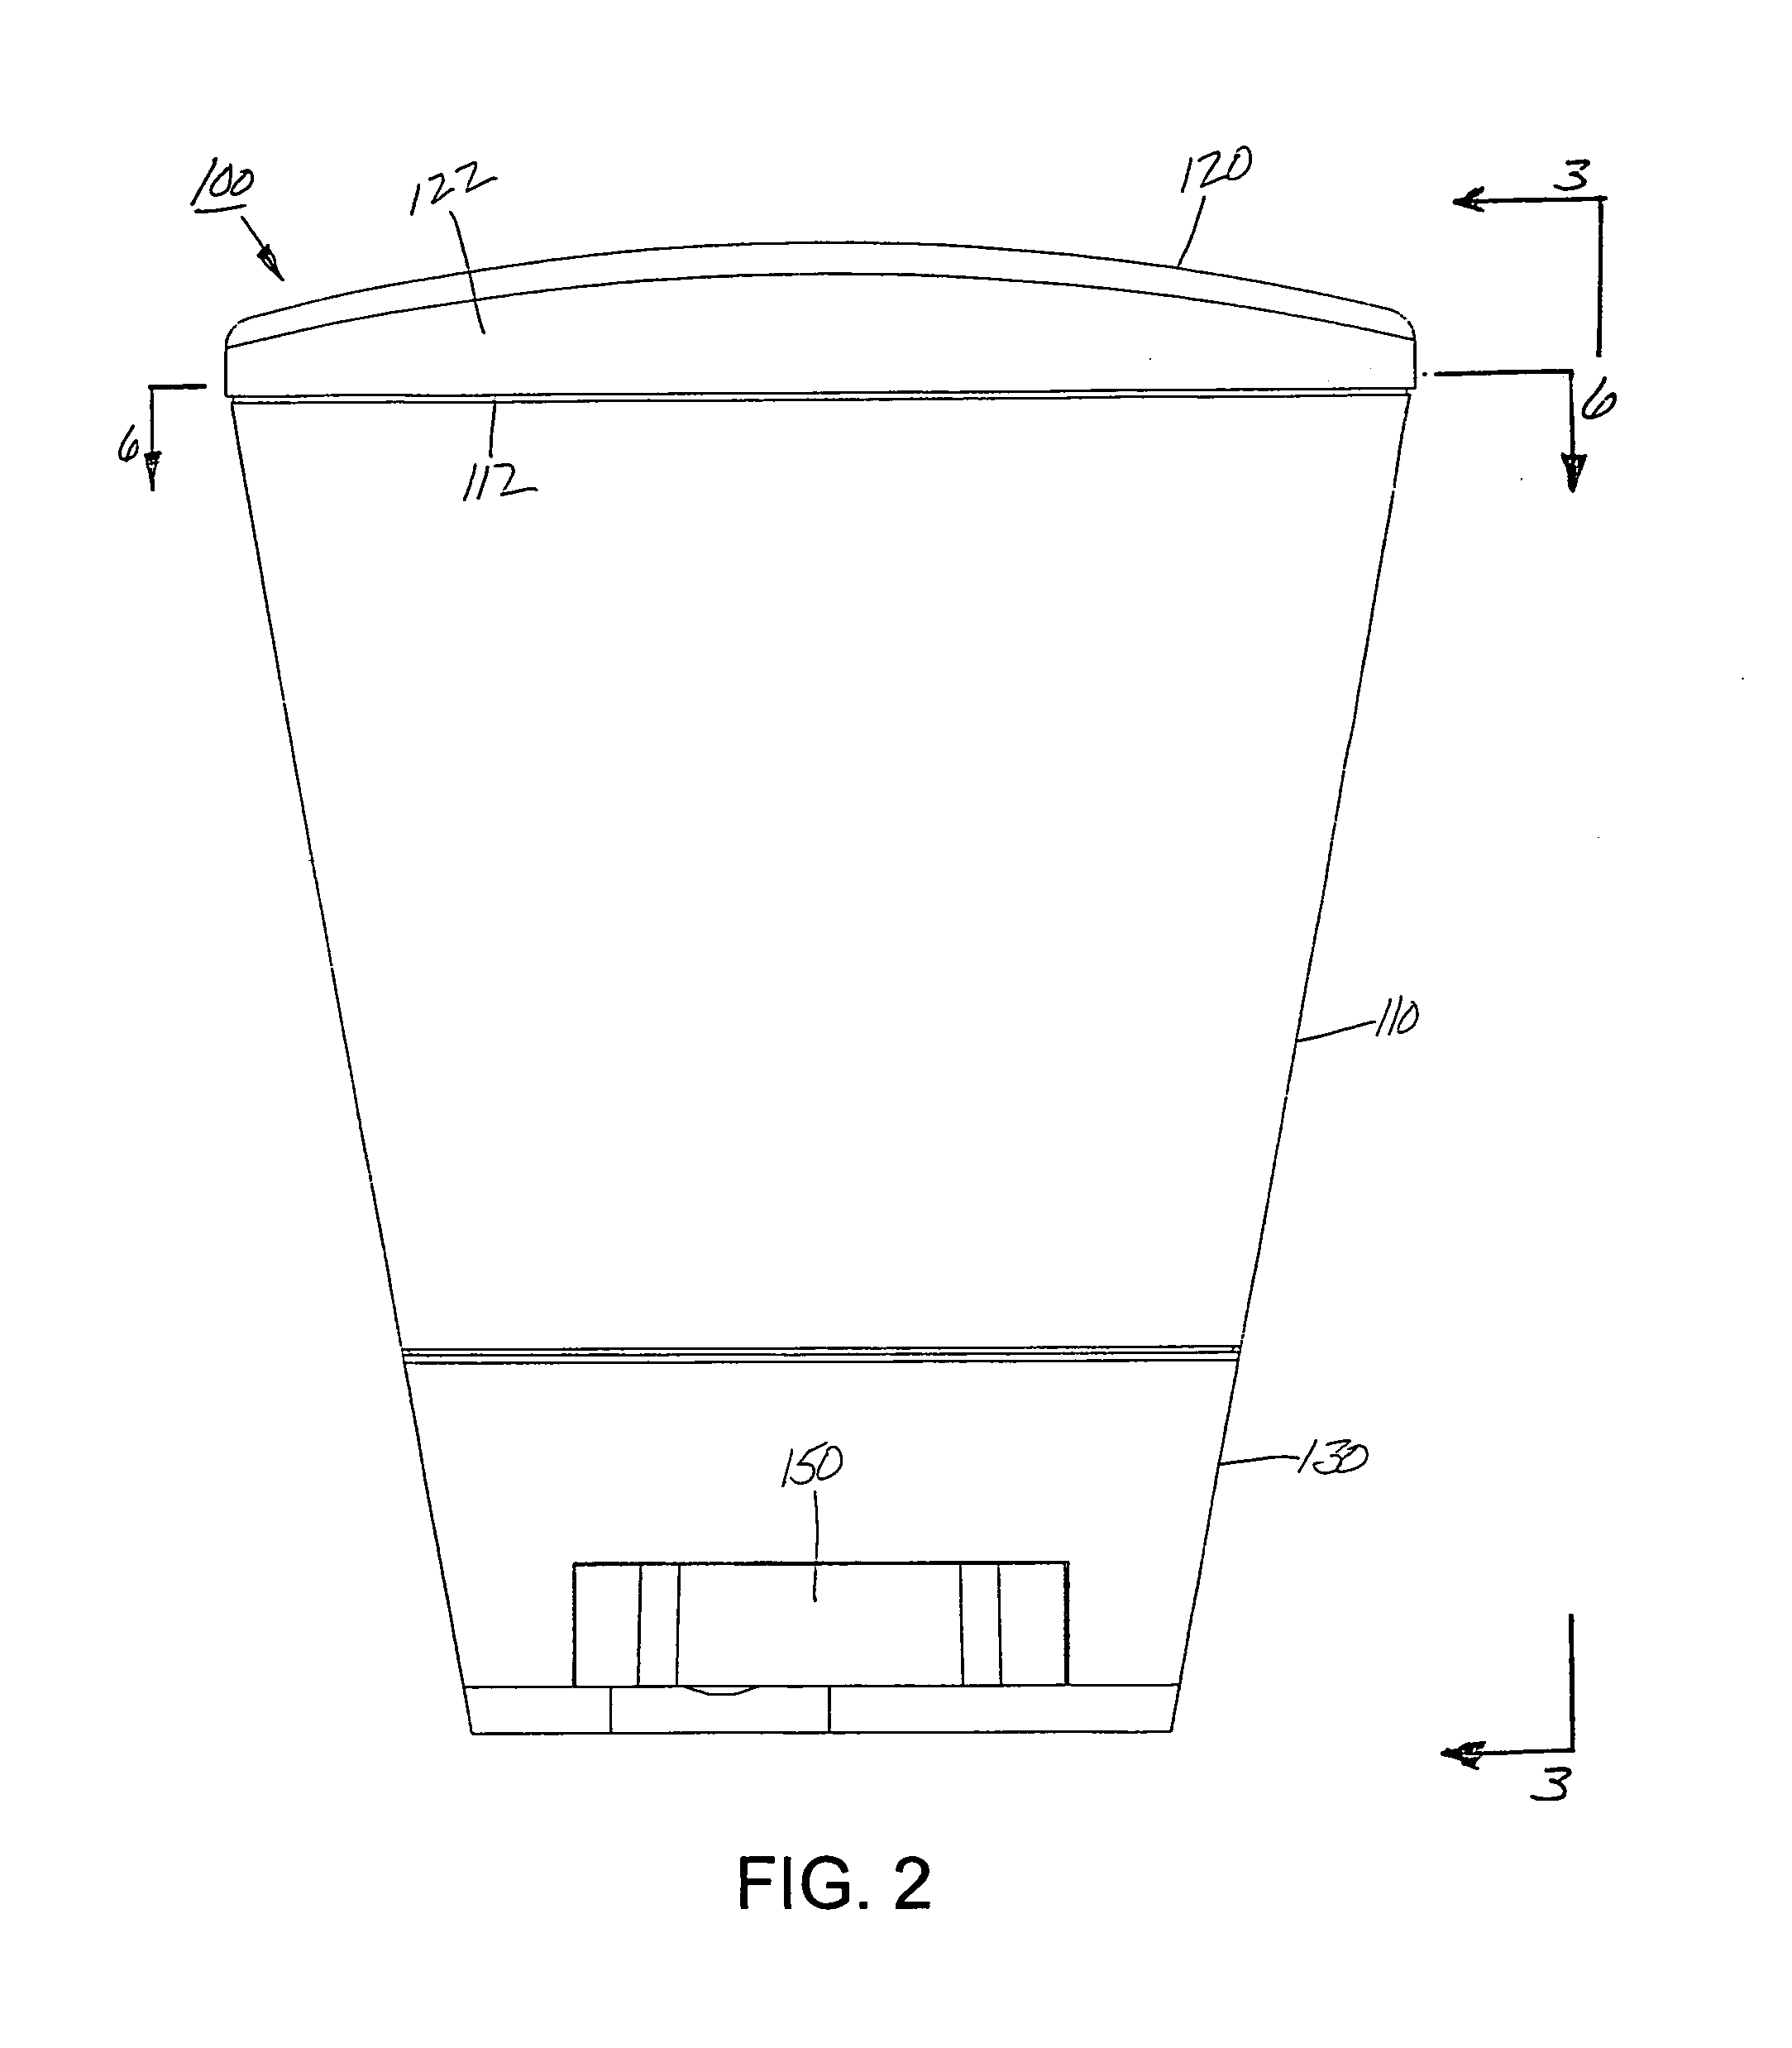 Dispenser apparatus and packaging to inhibit propagation of hand-borne pathogens